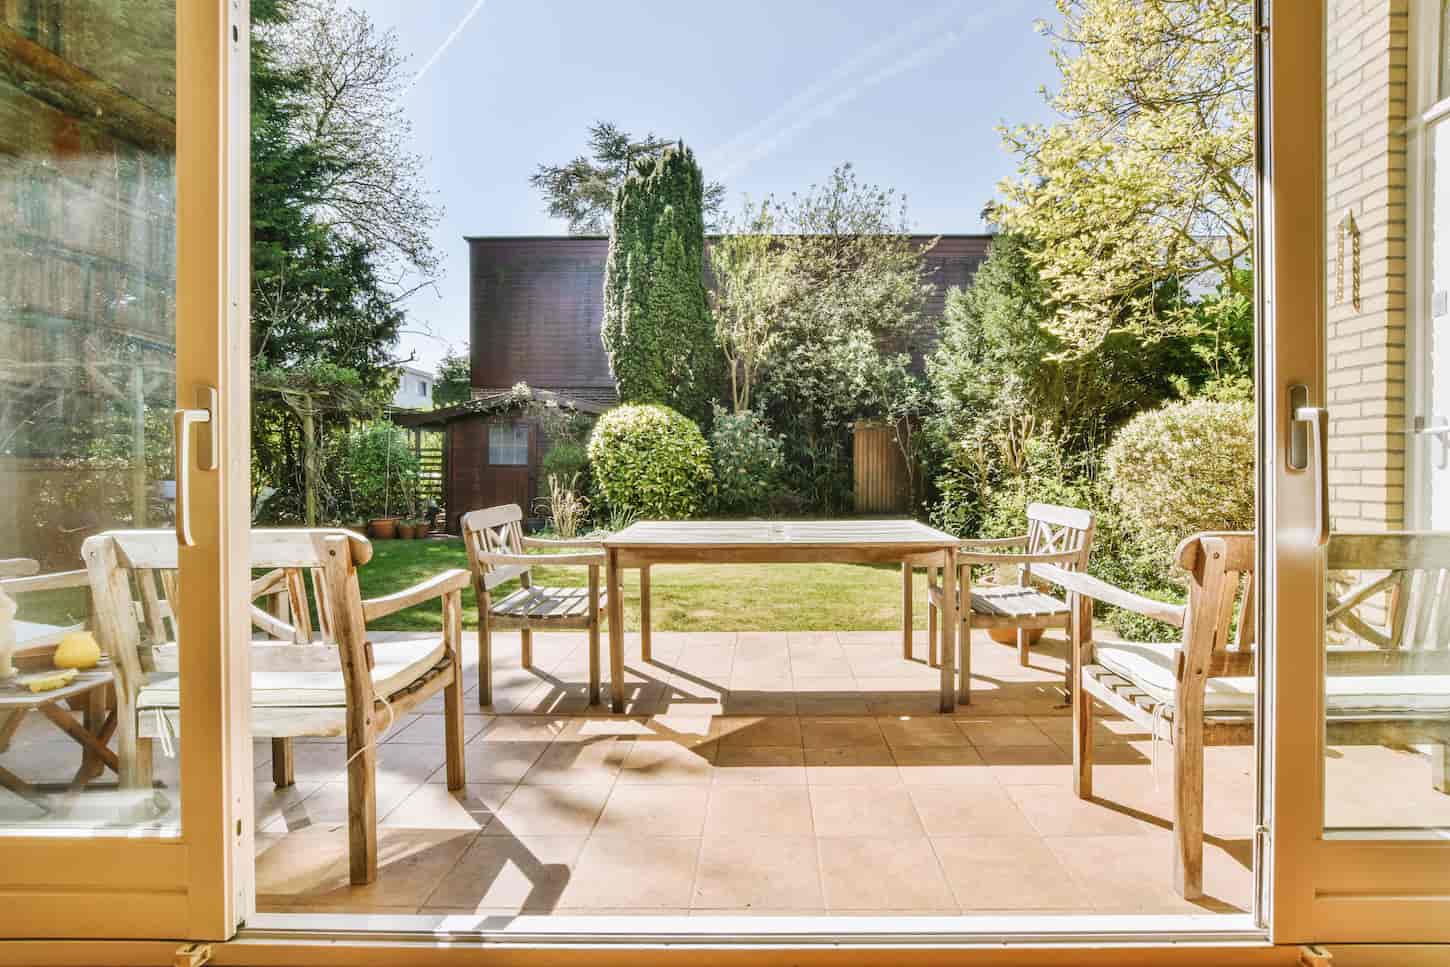 An image of a Neat paved patio with sitting area and small garden near wooden fence.